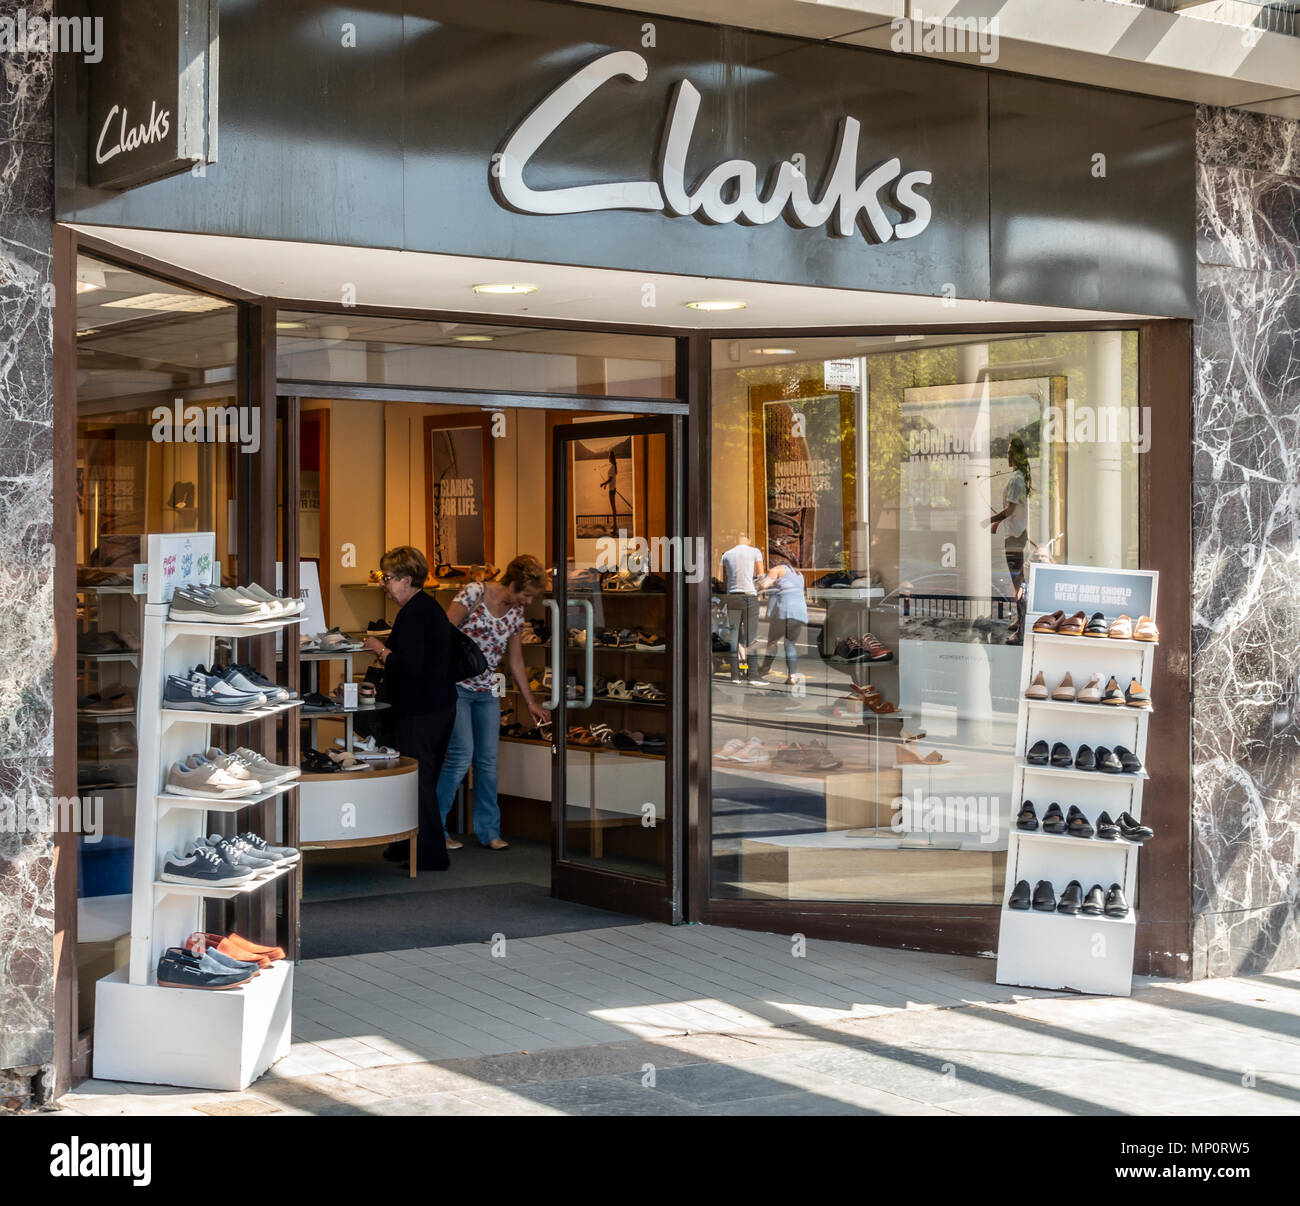 clarks shoes philippines stores